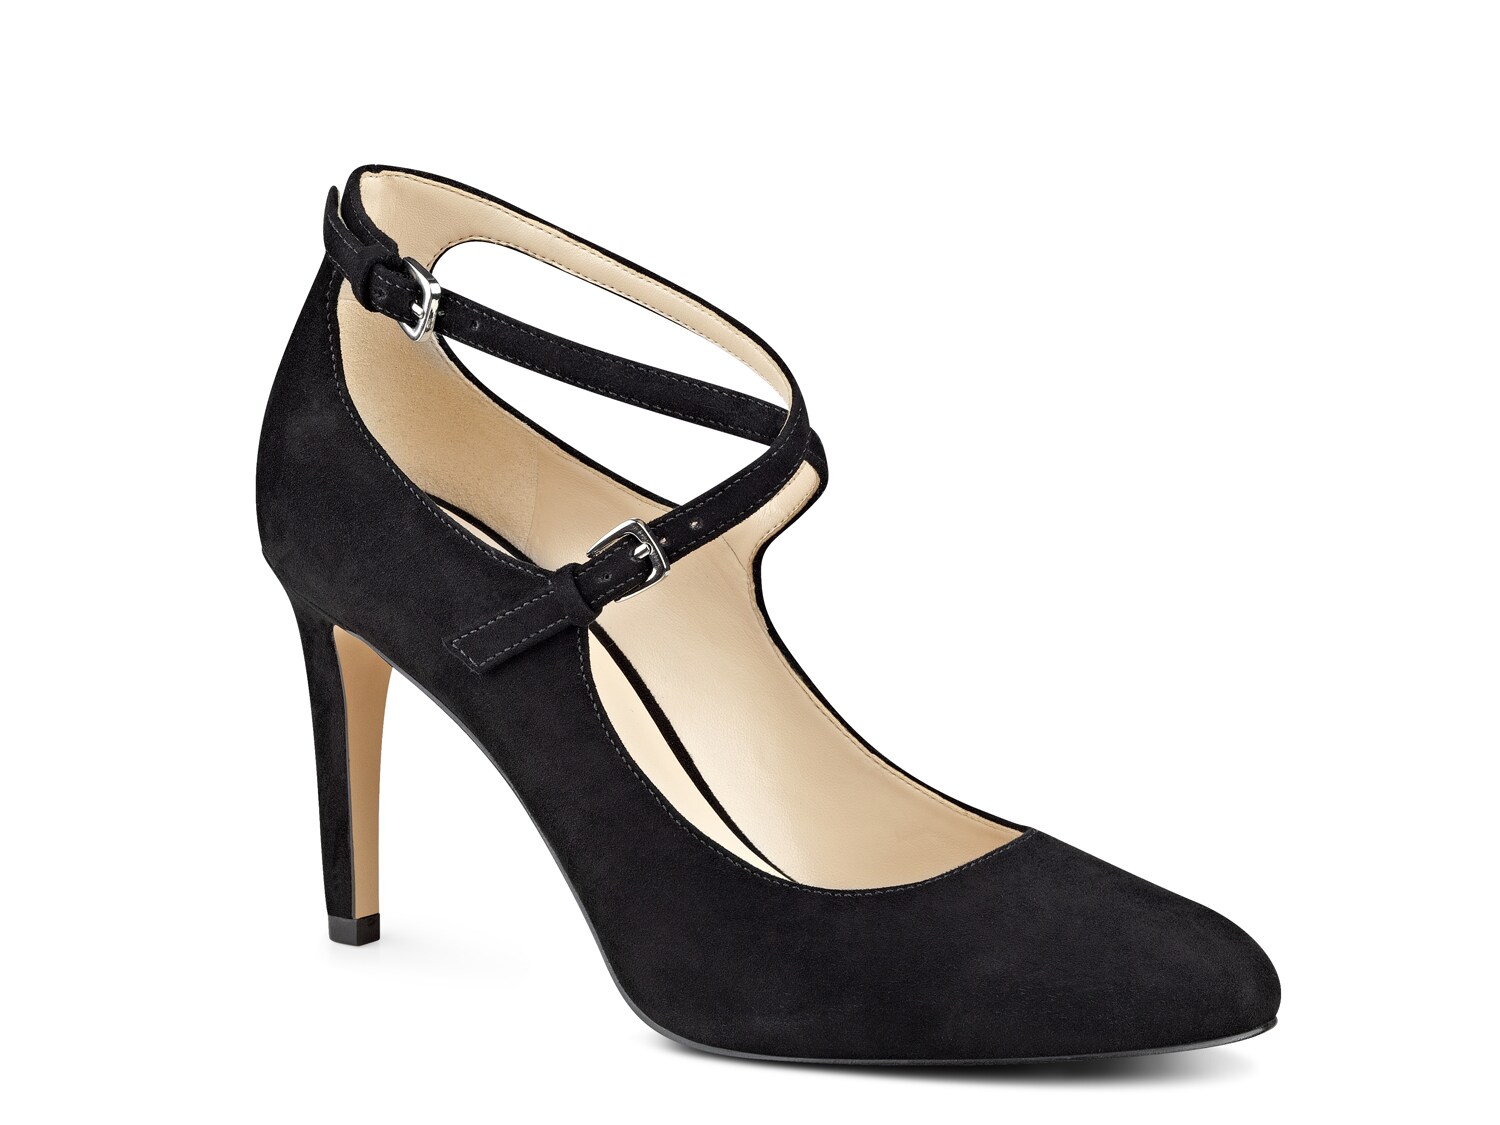 Nine West Hannley Suede Pump - Free Shipping | DSW